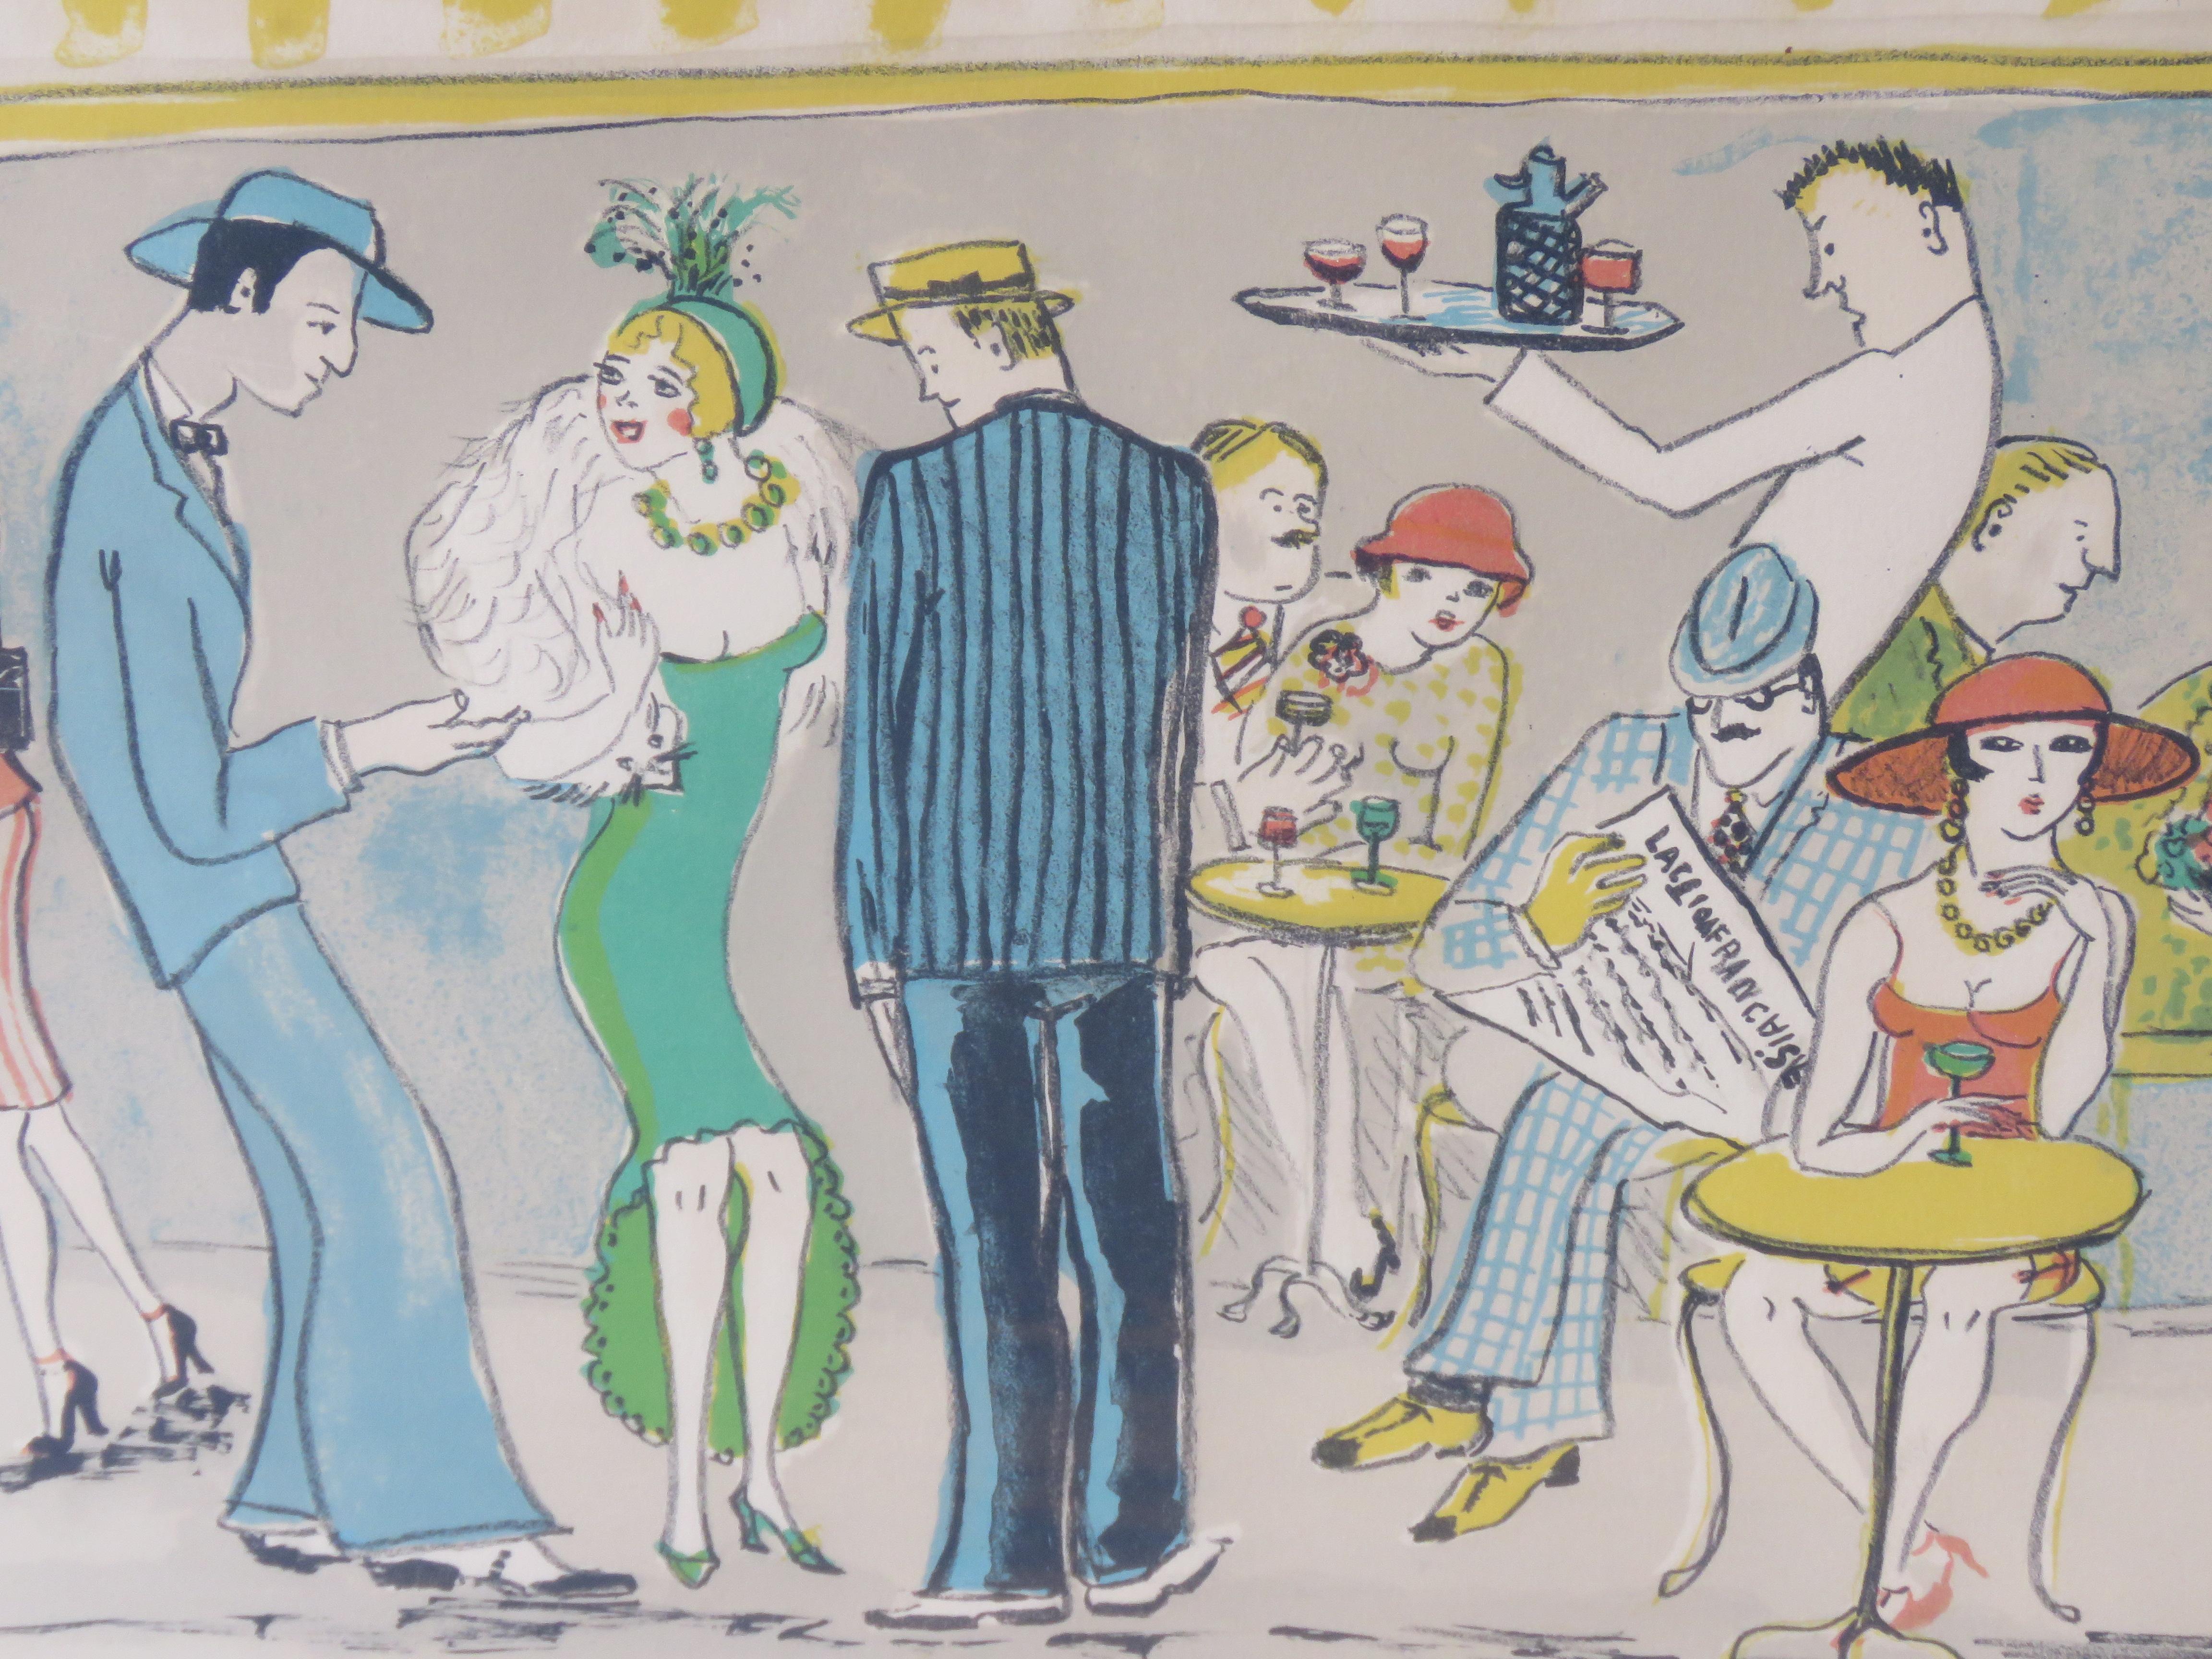 French Rare Important Original 1930s-40s Paris Cafe Lithograph Etching Drawing For Sale